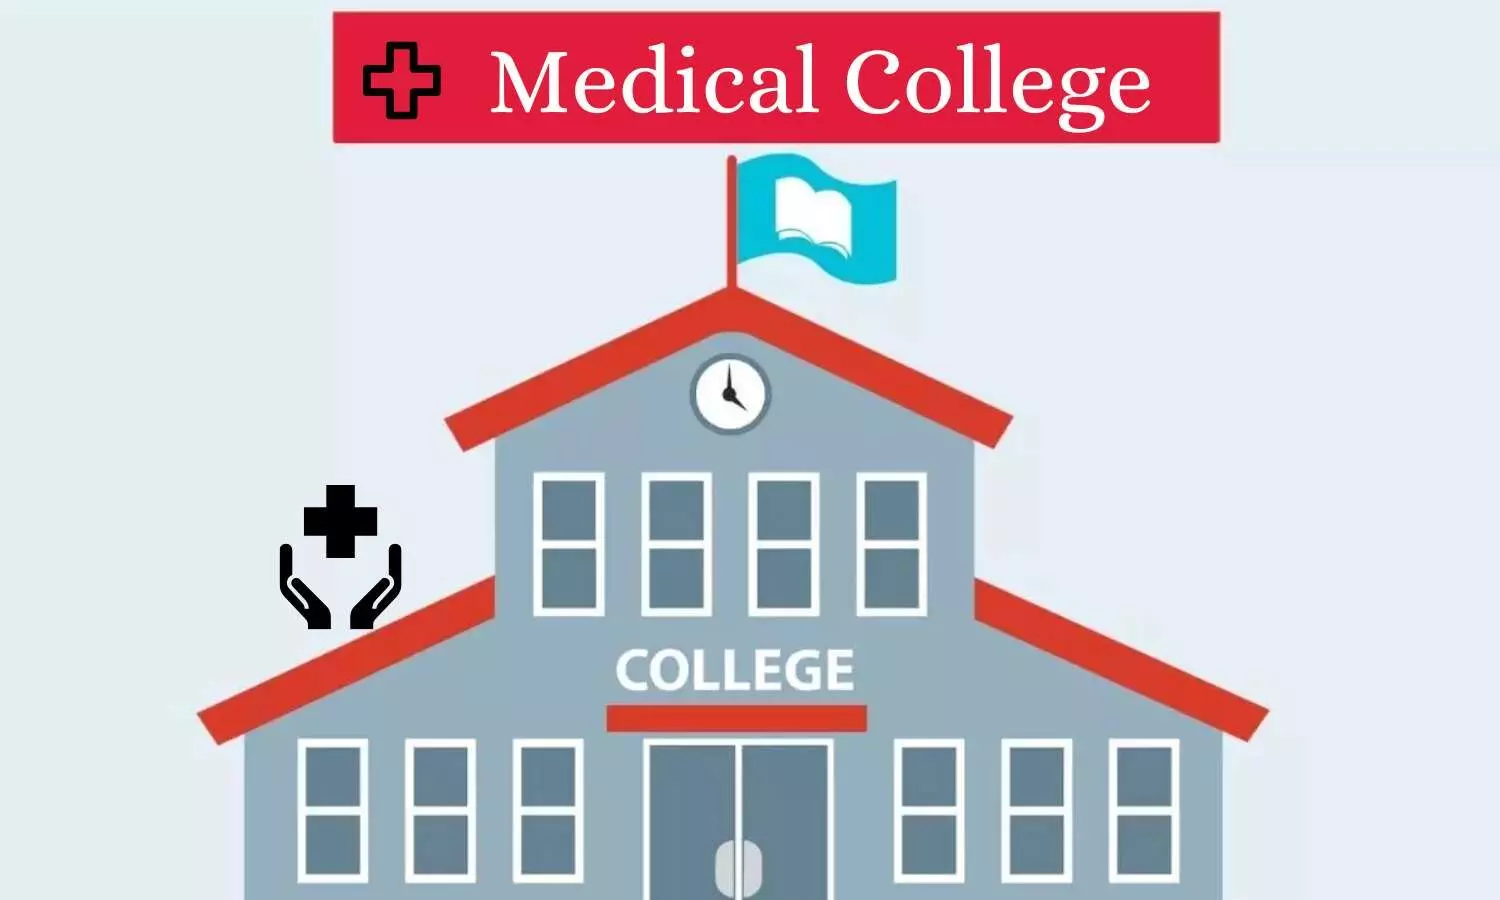 Coming Soon: Five new medical colleges in Telangana, govt sanctions funds